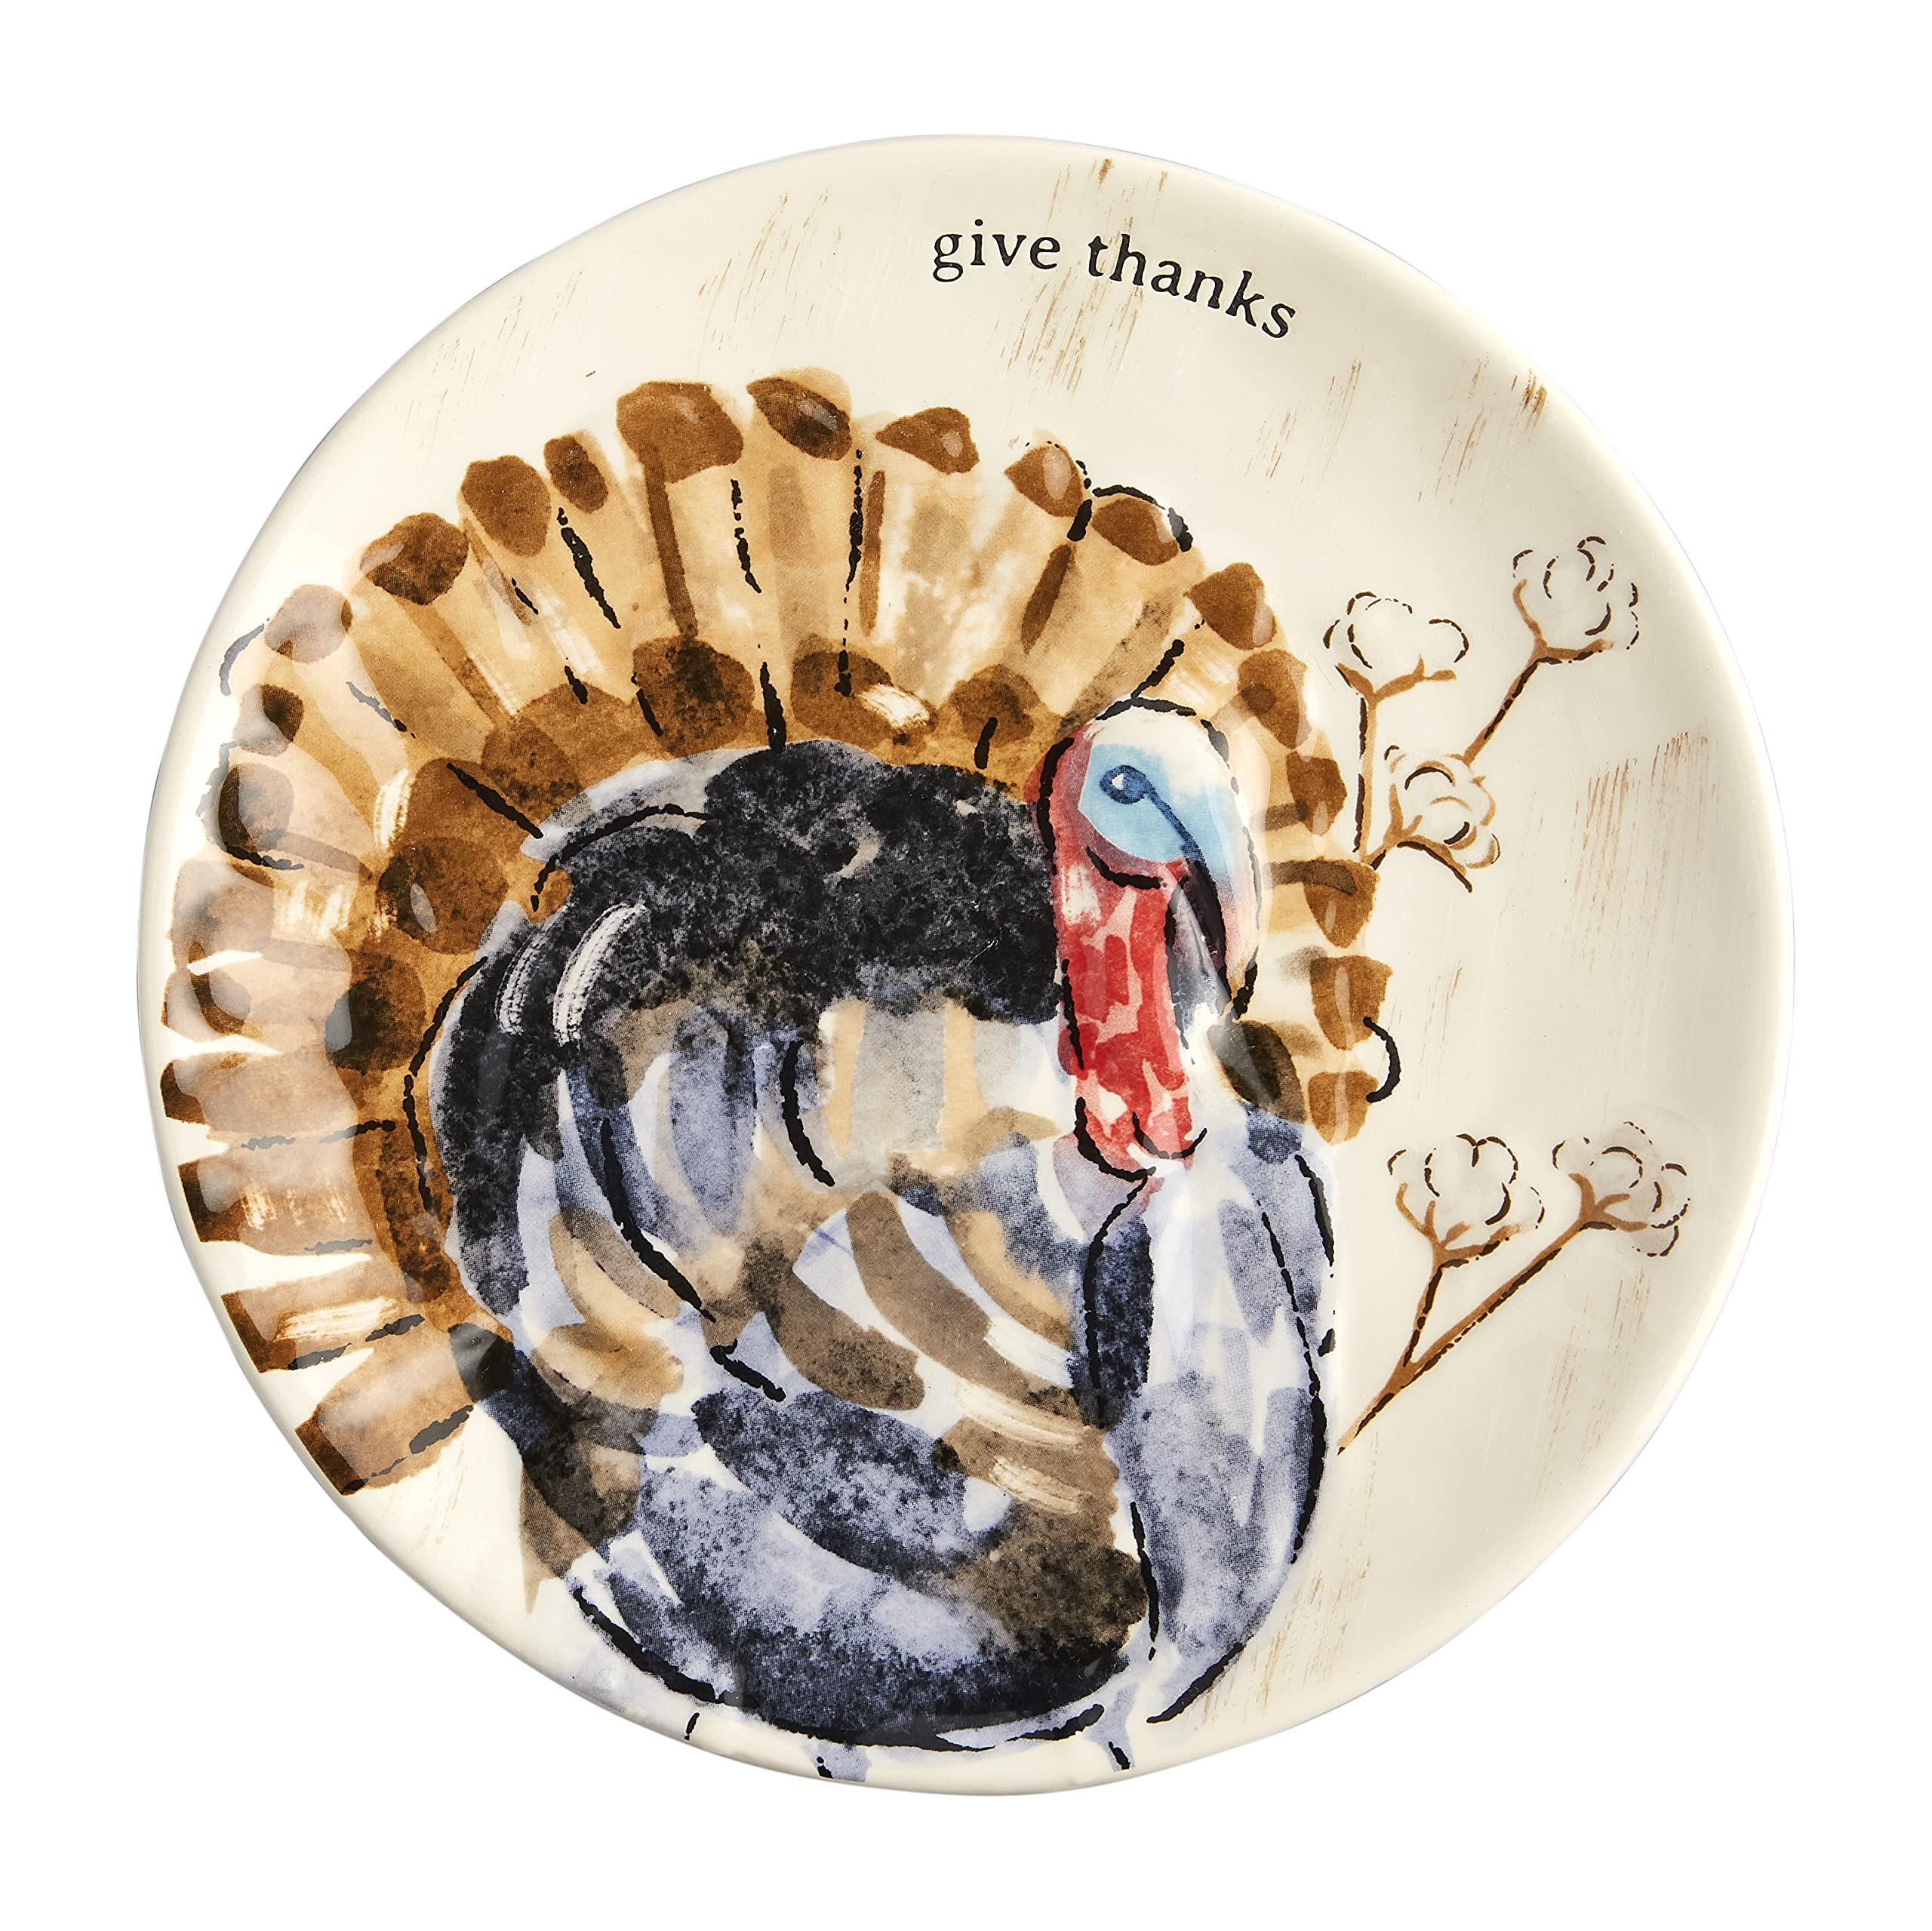 Mud Pie Thanksgiving Salad Plate, Give Thanks, 8" dia